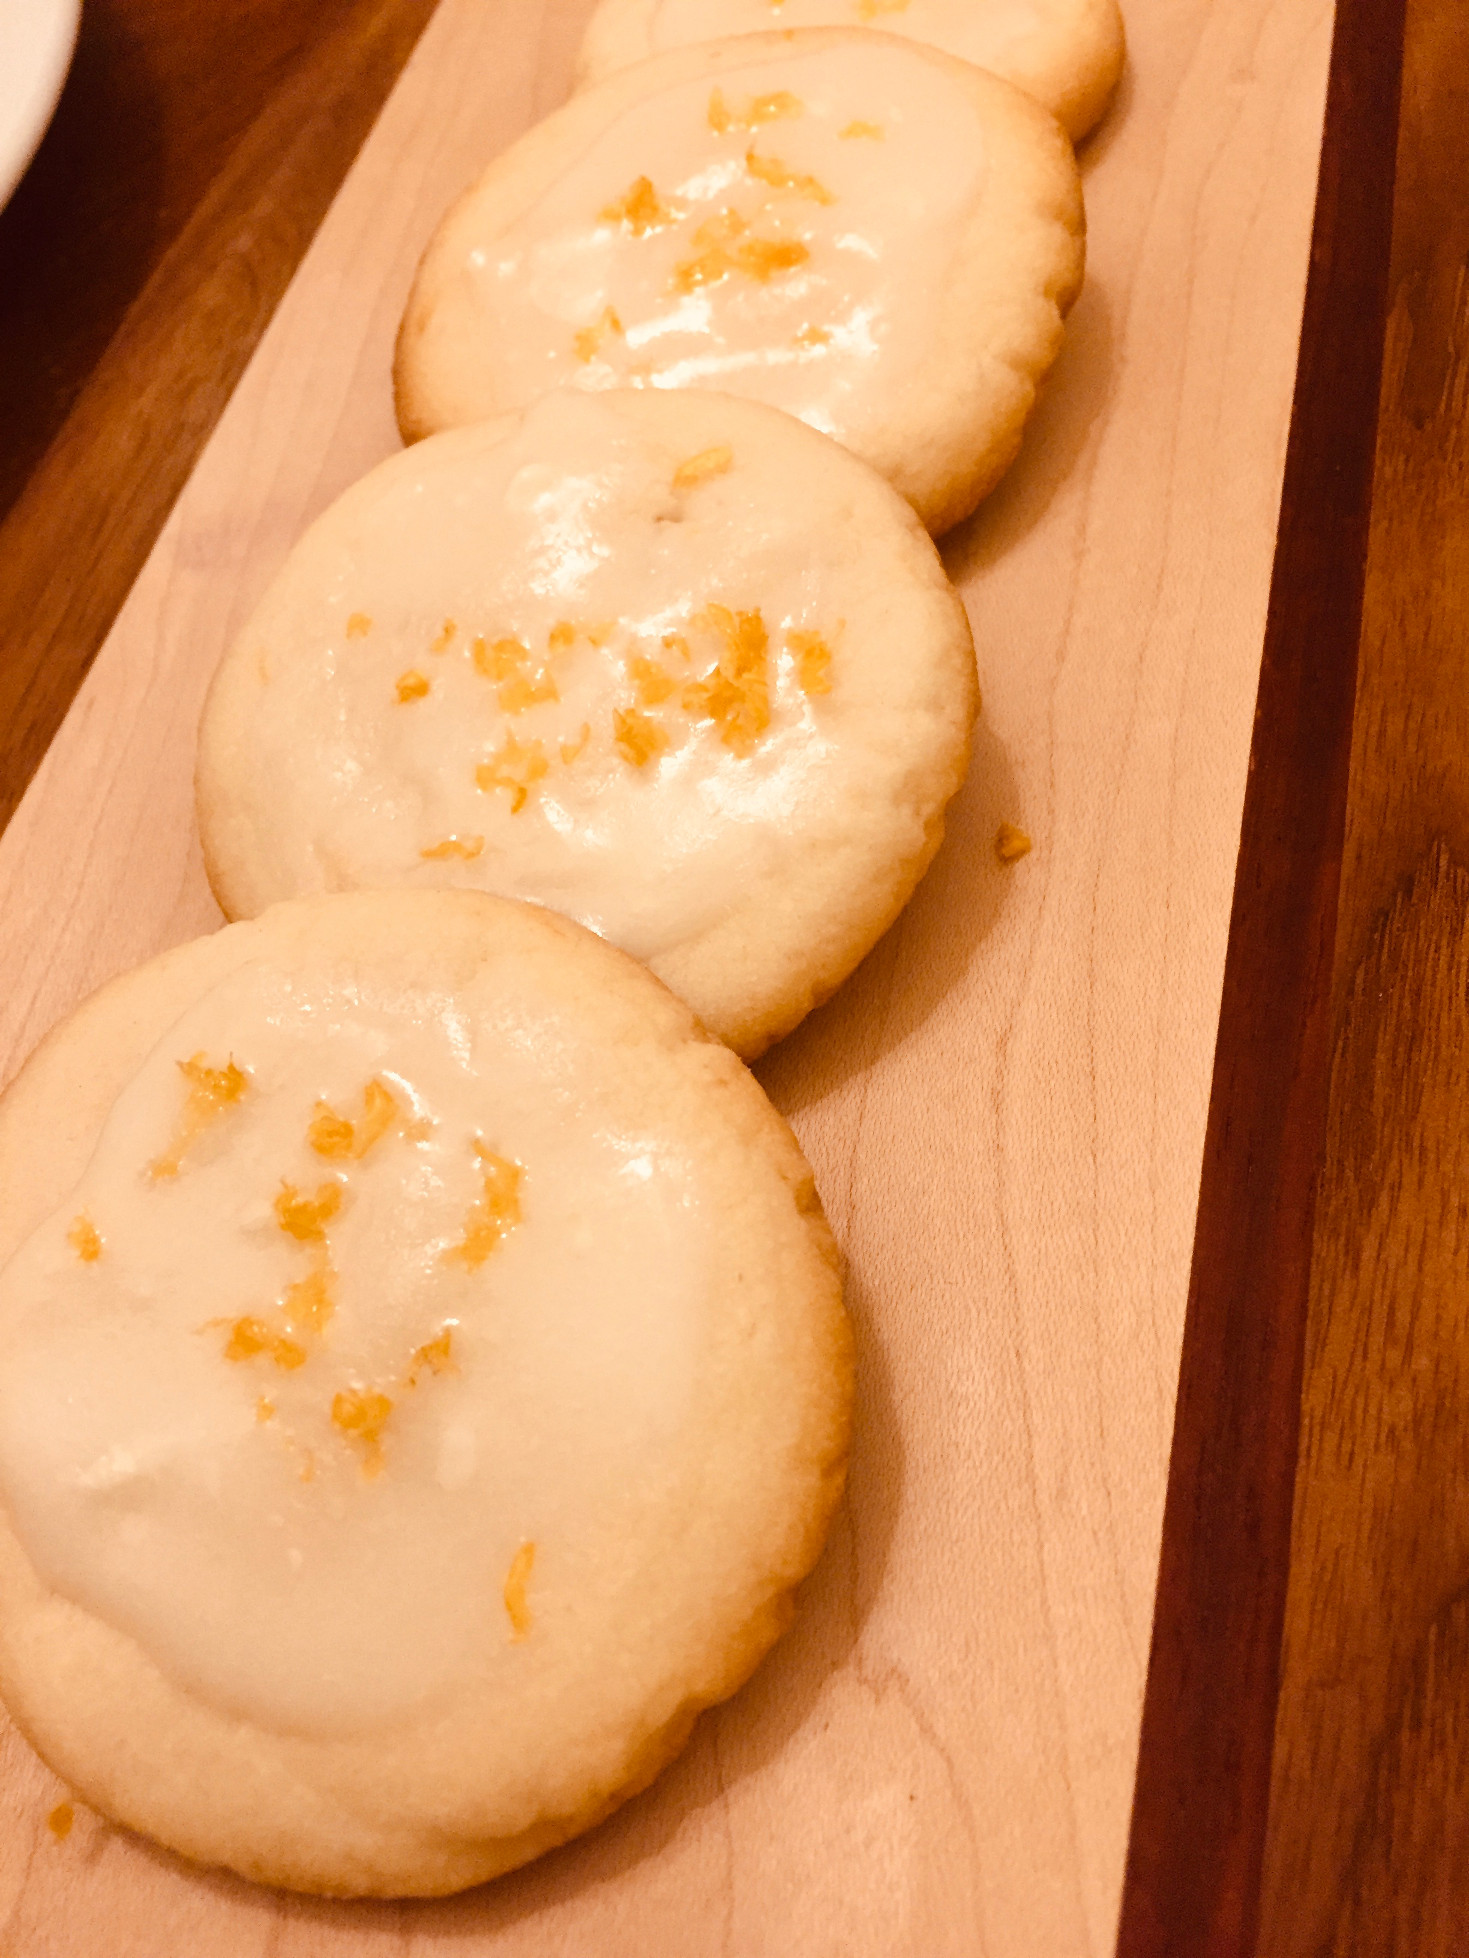 Finished lemon butter cookies on a wood board Butter Cookies Recipe Baking Those Someday Goals